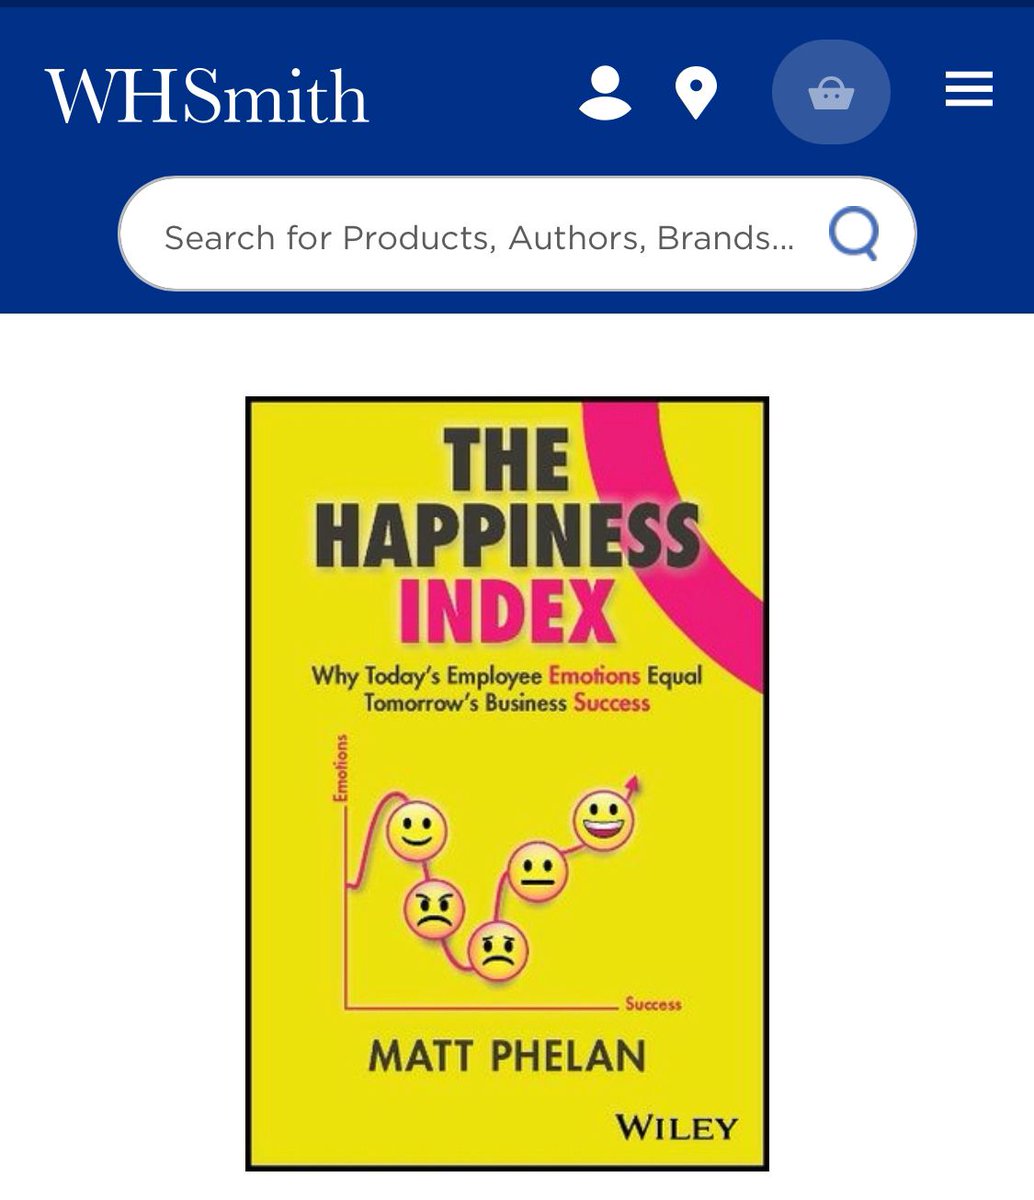 10 days until the new book is out… 😱 Available to pre-order @ WH Smith Barnes and Noble Amazon Foyels Booktopia BookshopOrg Waterstones Publisher: Wiley Please tag someone you think might enjoy it 👋 #BookLaunch #TheHappinessIndex #Happiness #EmployeeHappiness